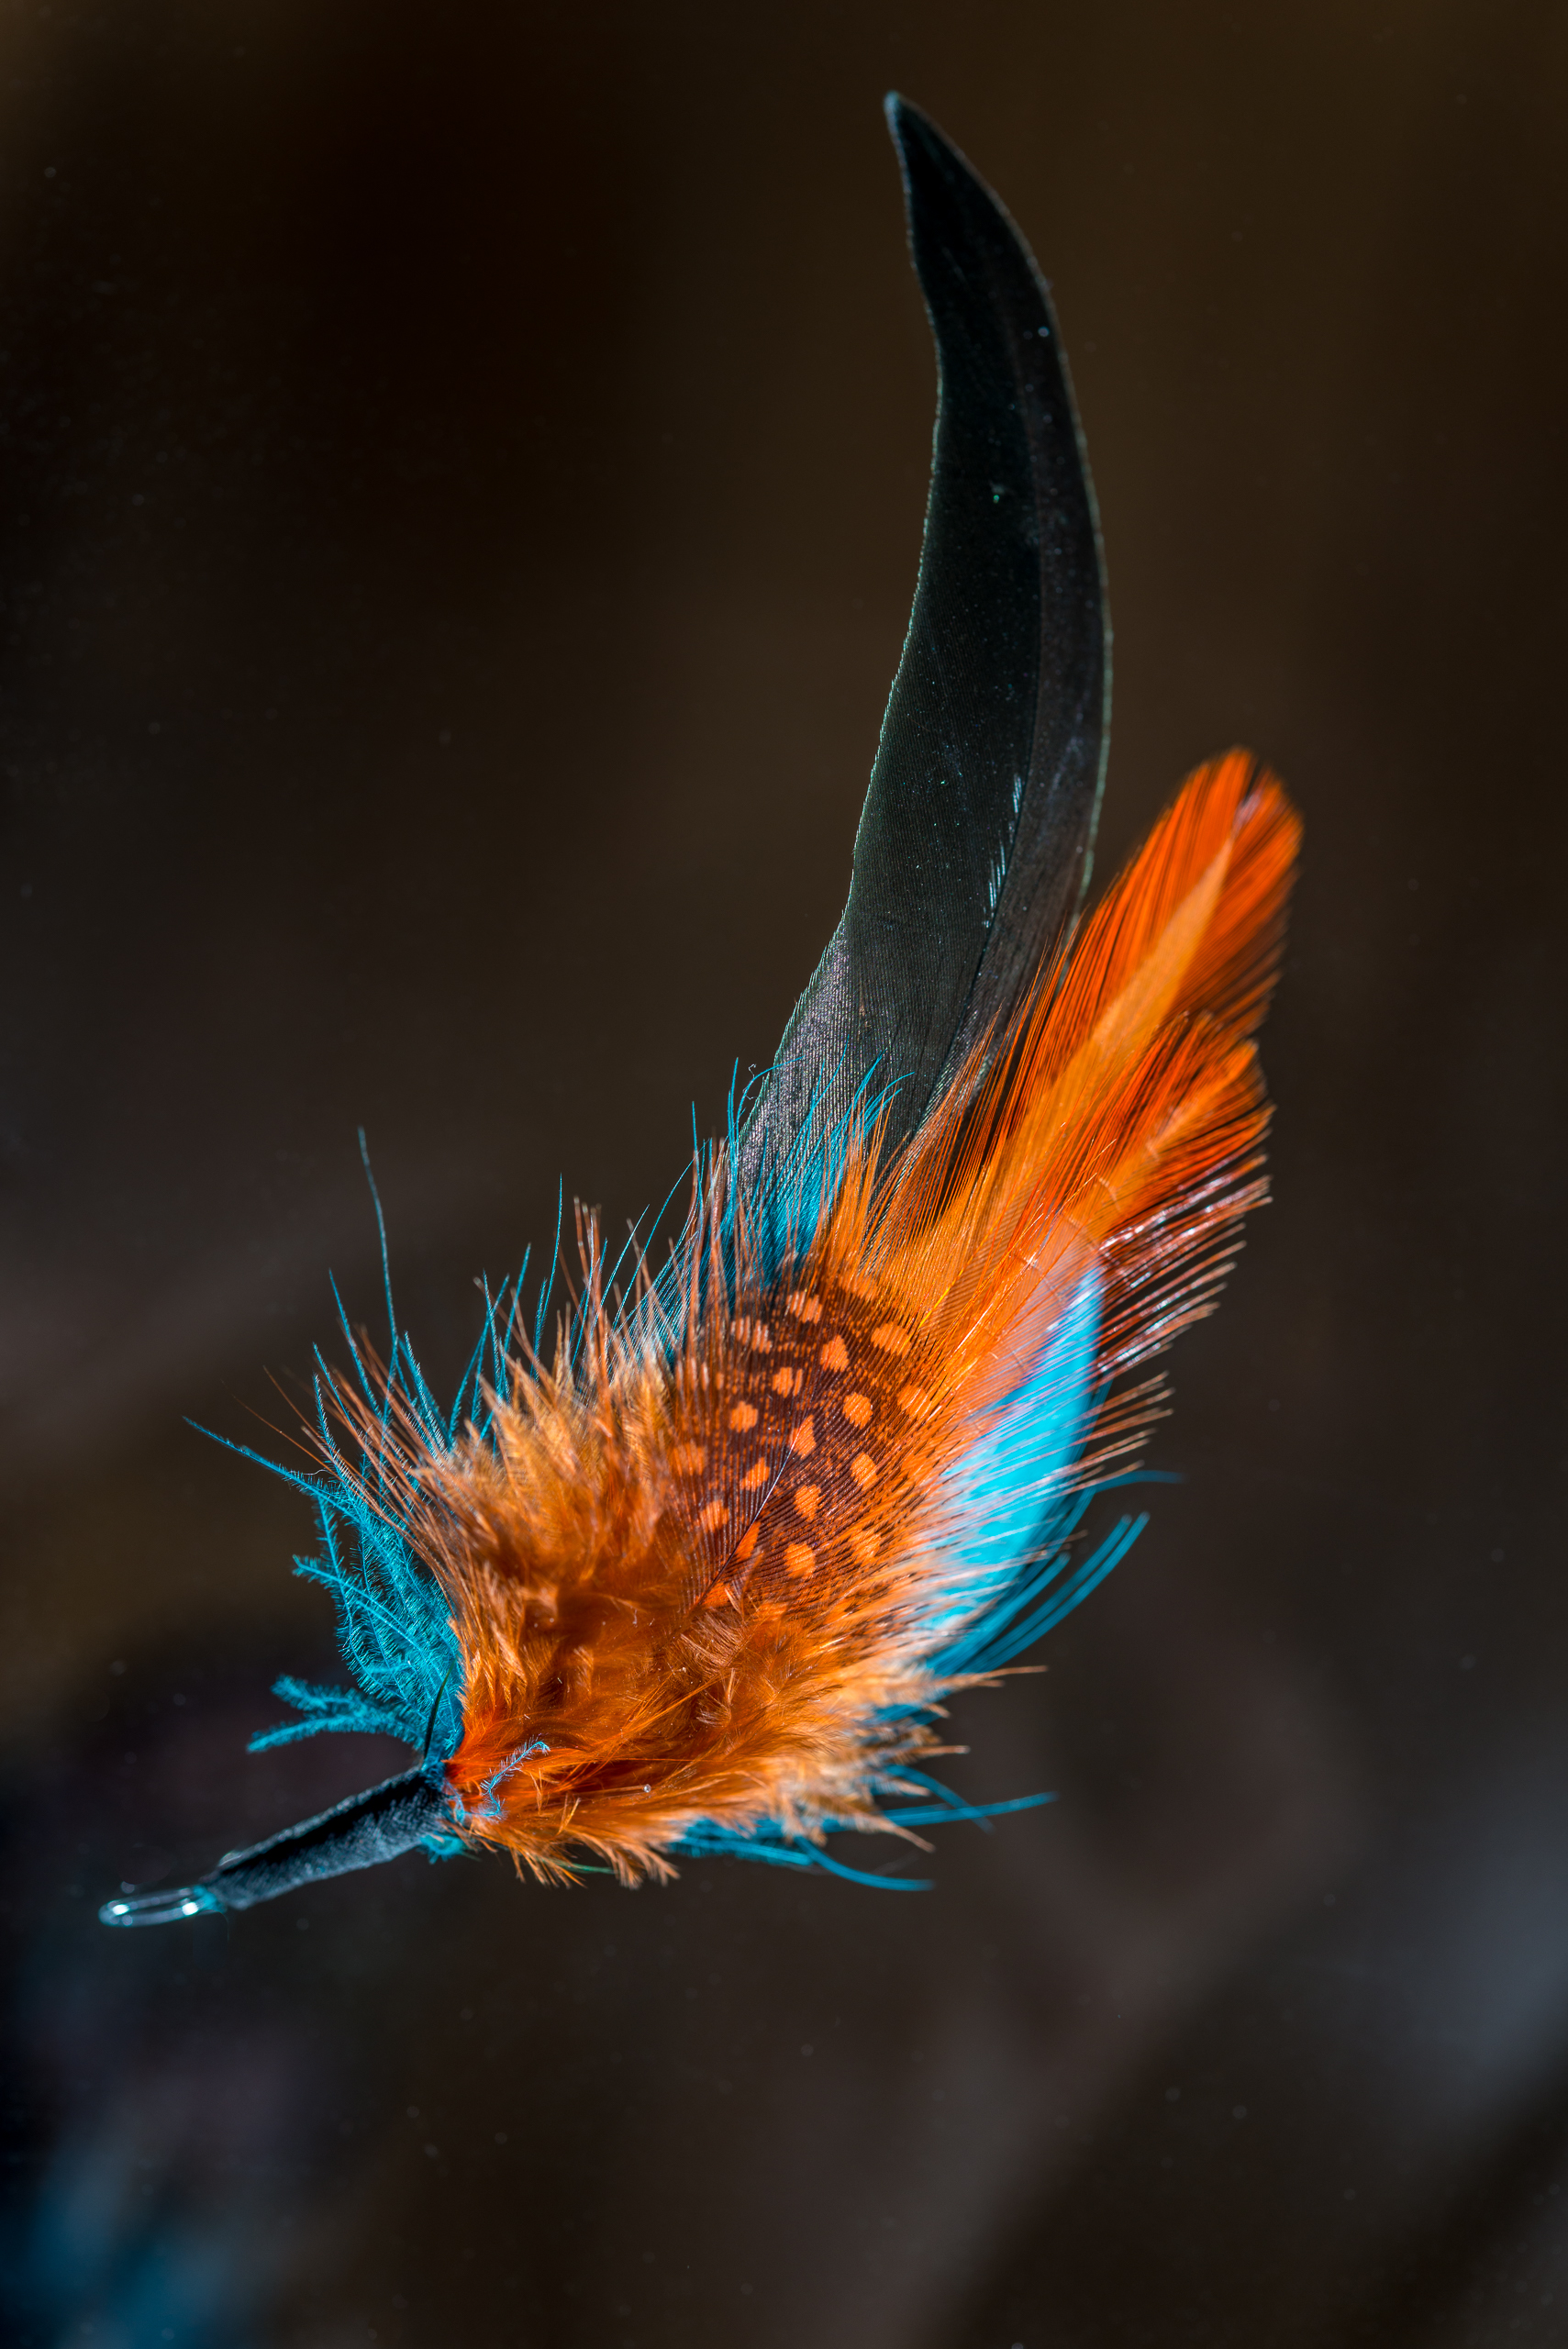 Decorative feather, with orange and blue feathers